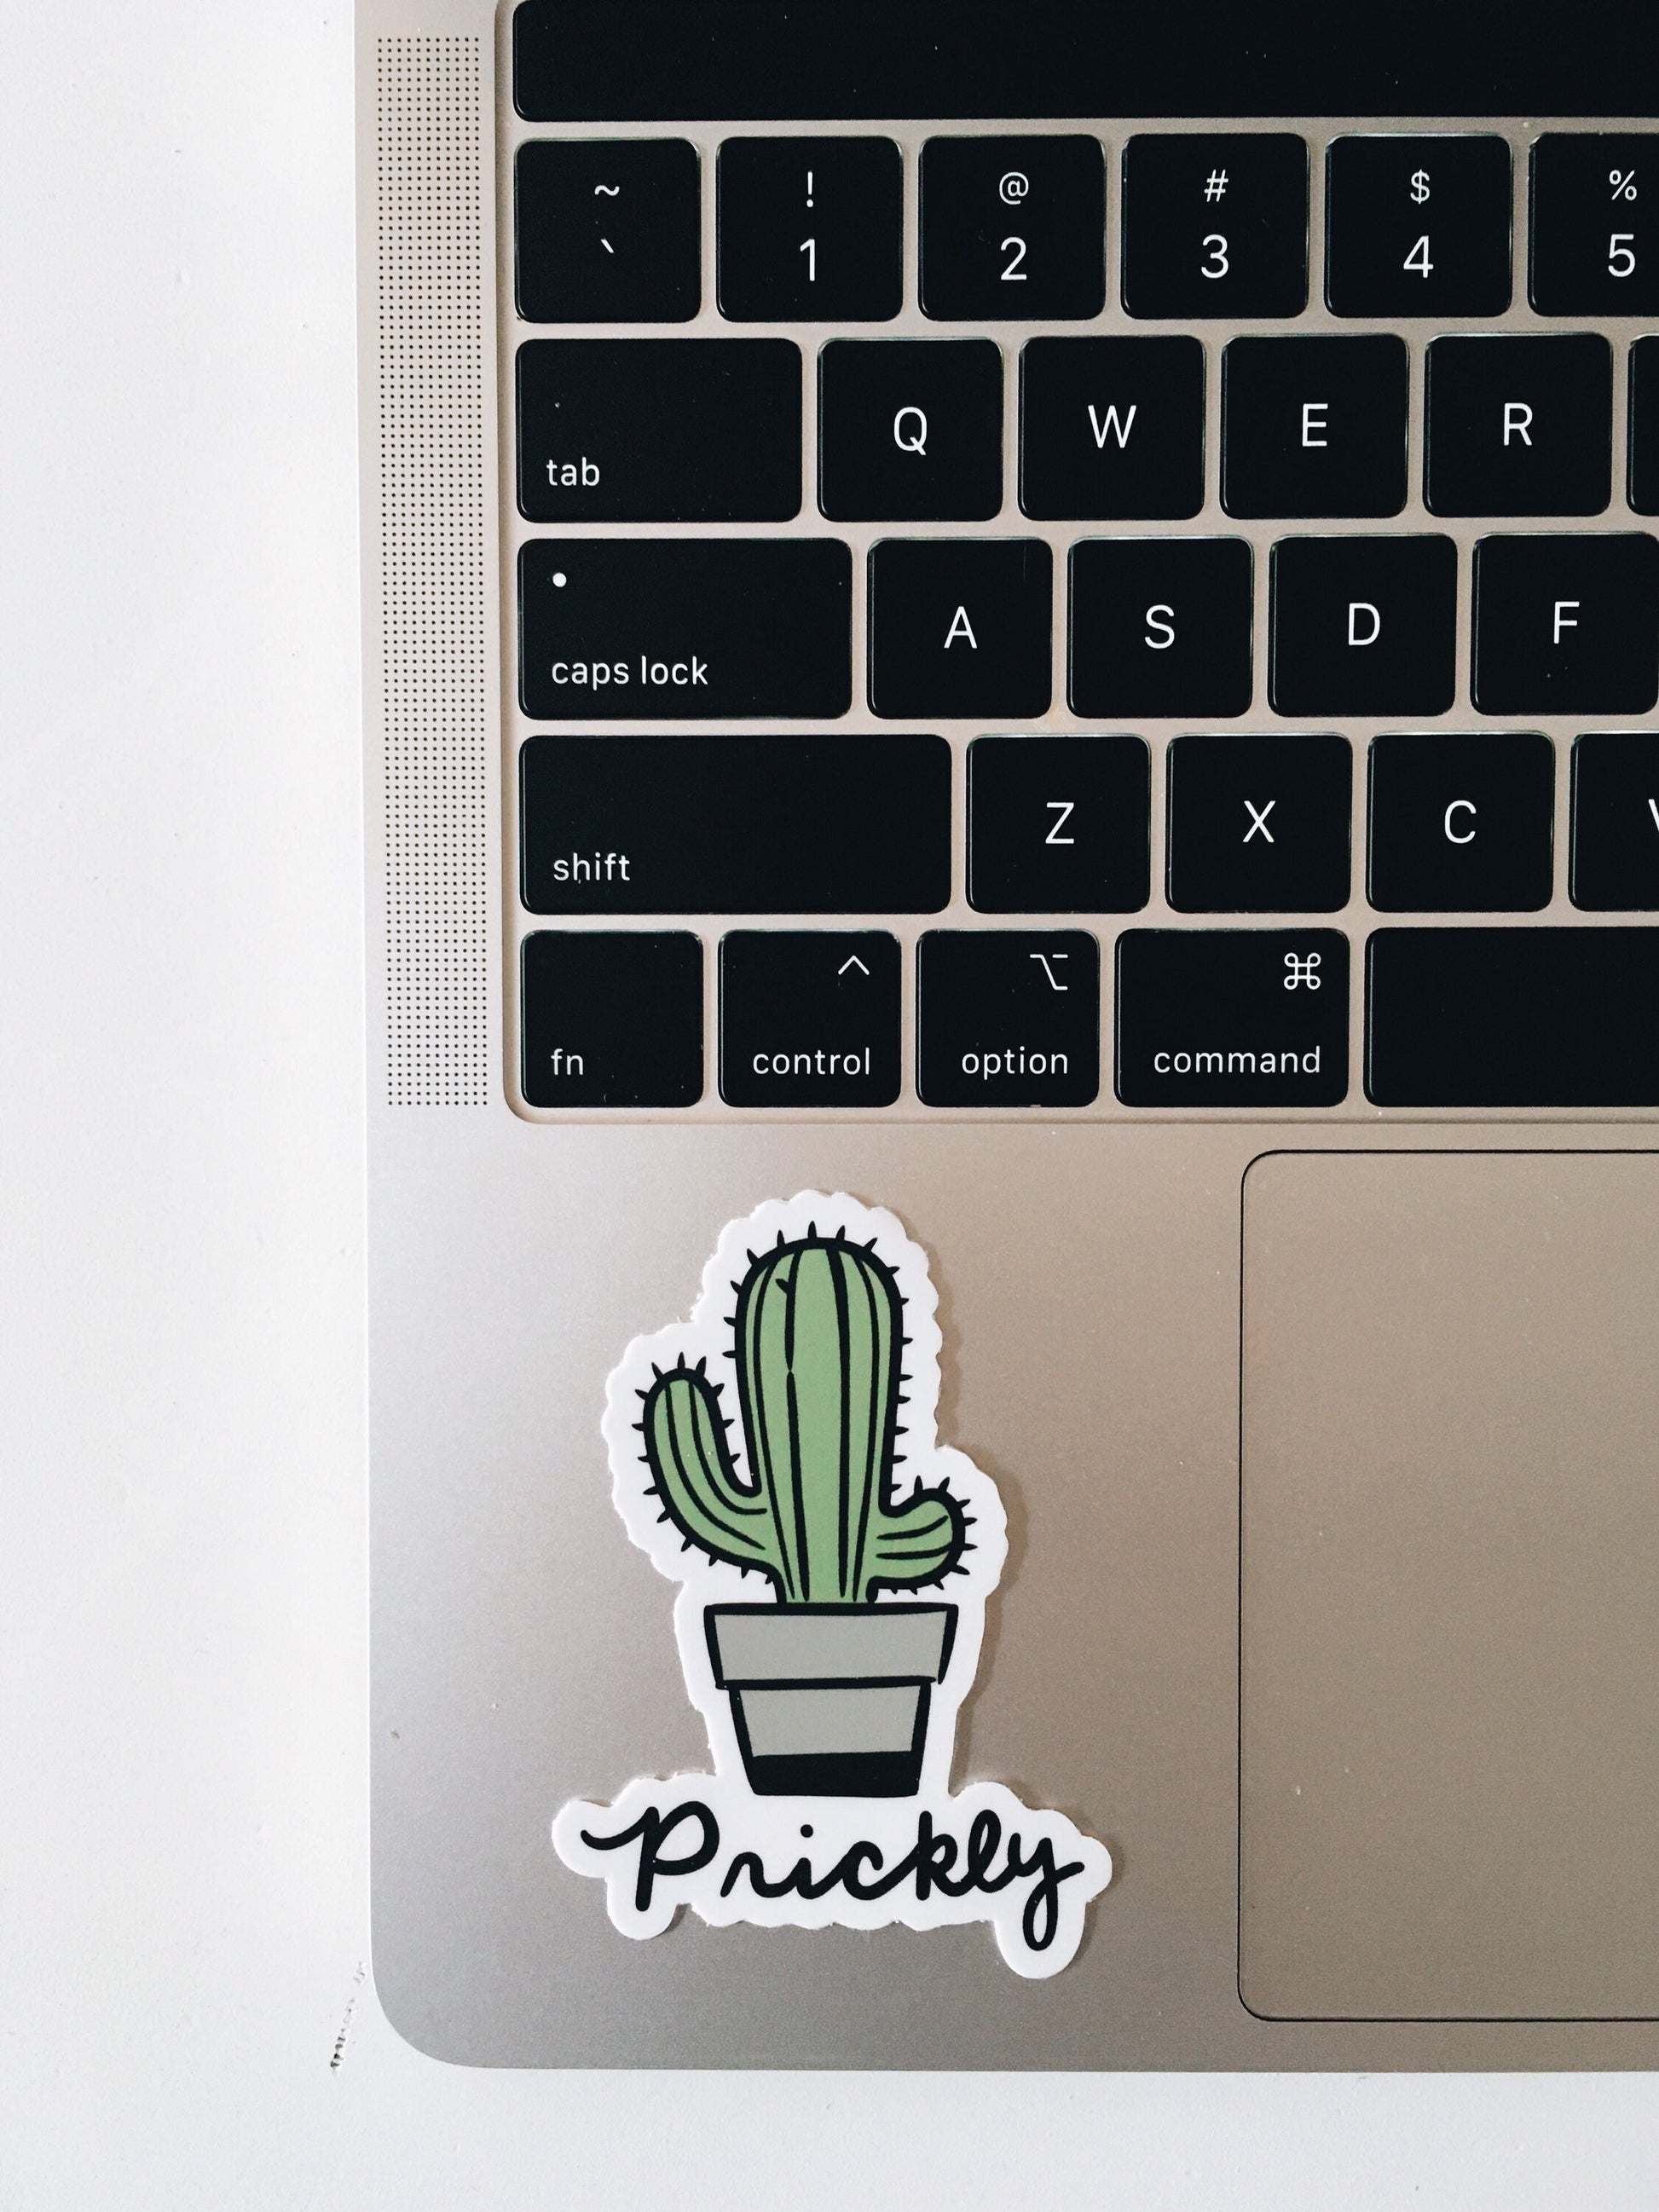 Funny Cactus Weatherproof, Durable Sticker | Vinyl Decal | Waterbottle, Laptop decal | Plant Lover Gift | Cactus Decal | Millennial Gift